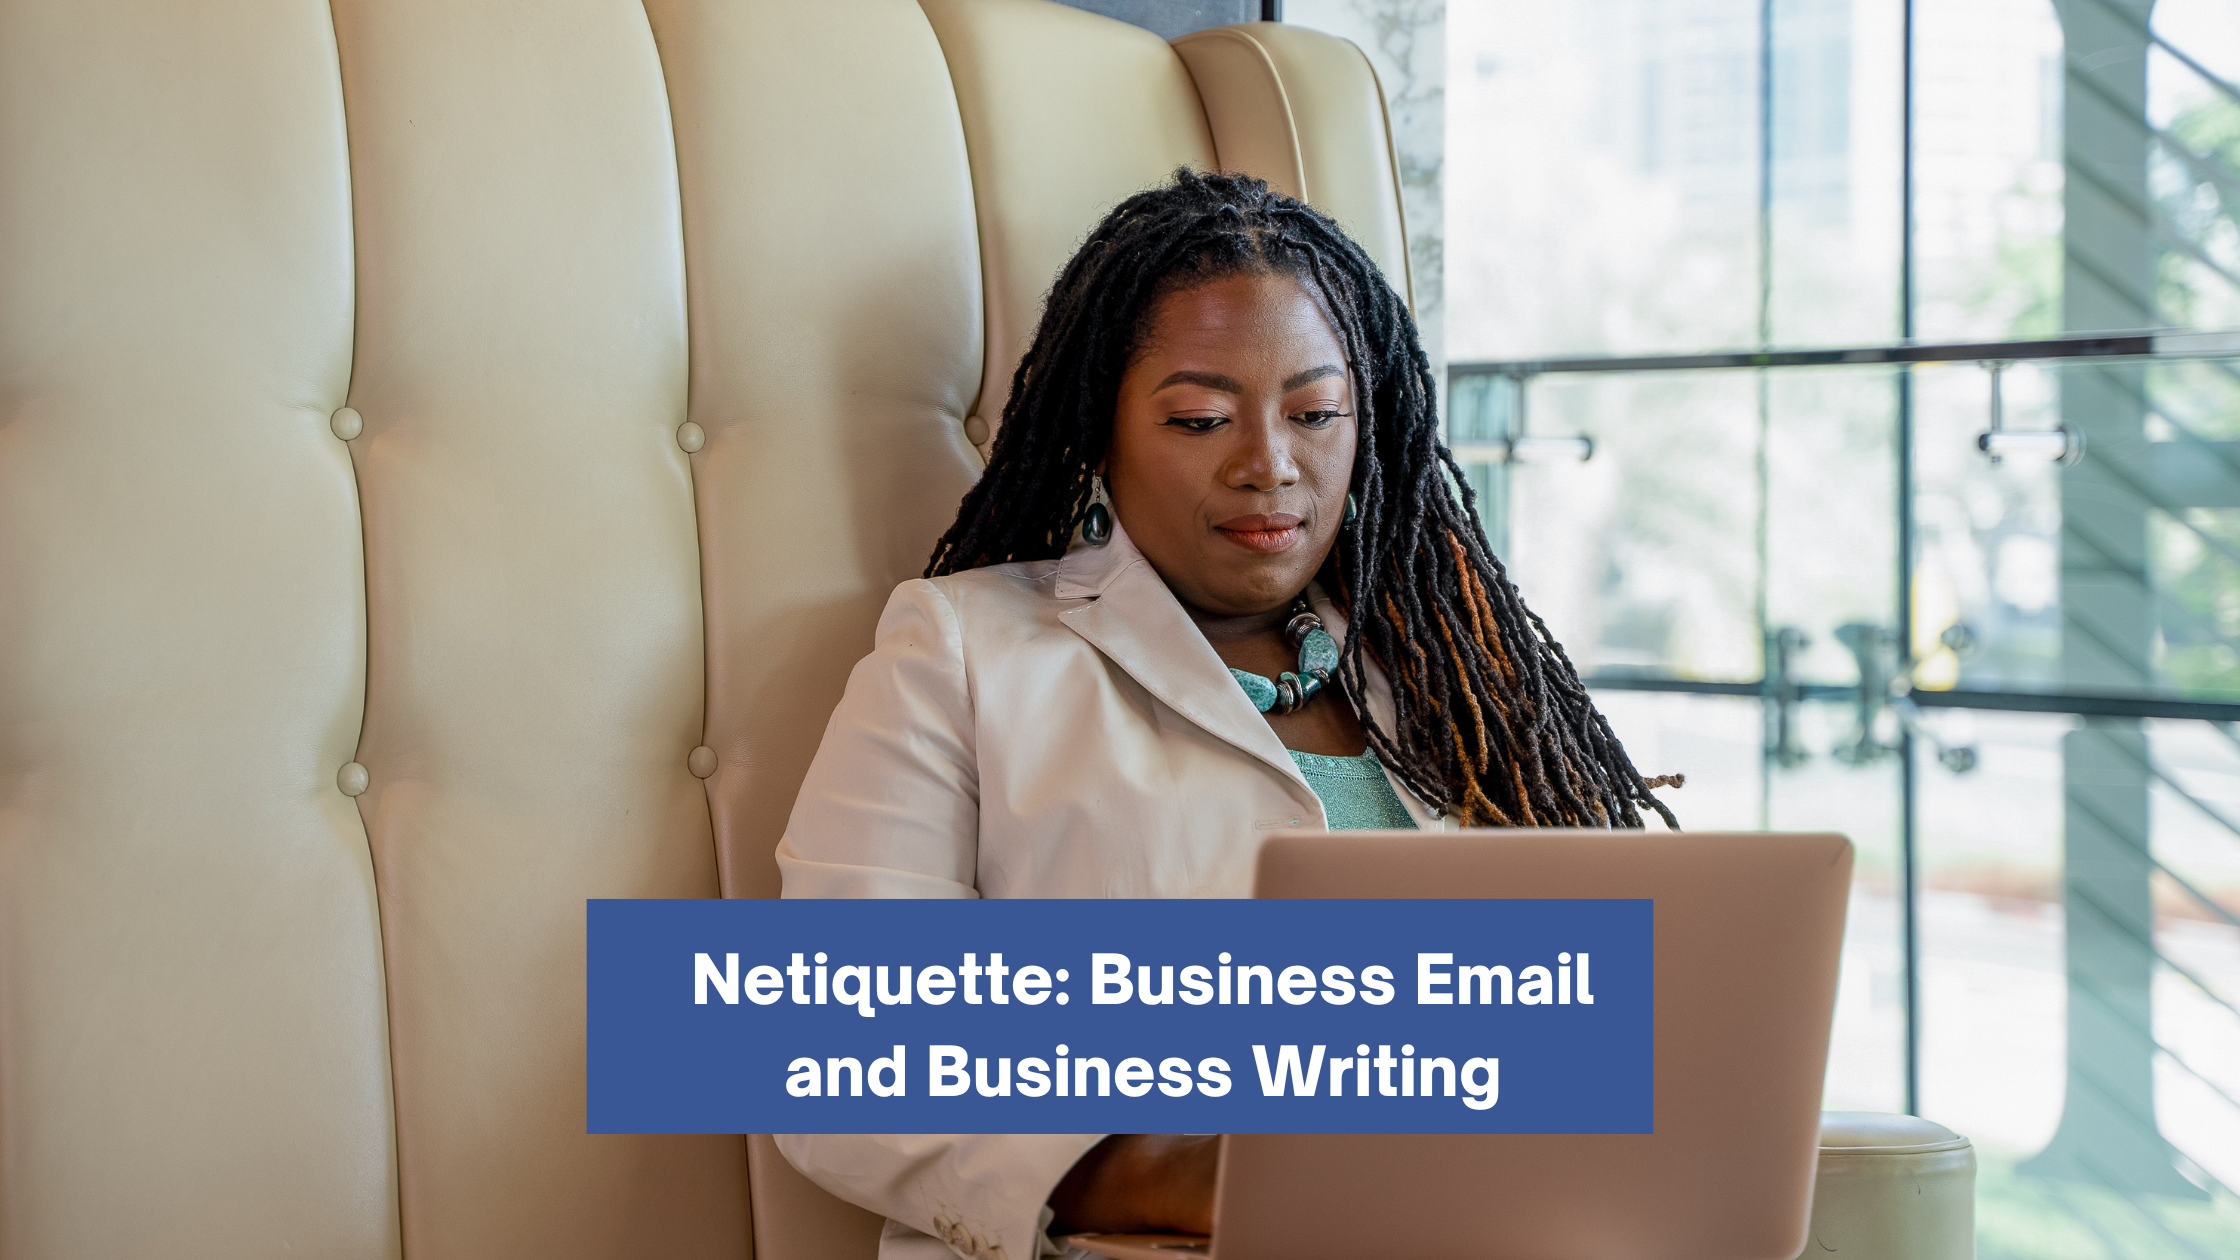 Netiquette: Business Email and Business Writing